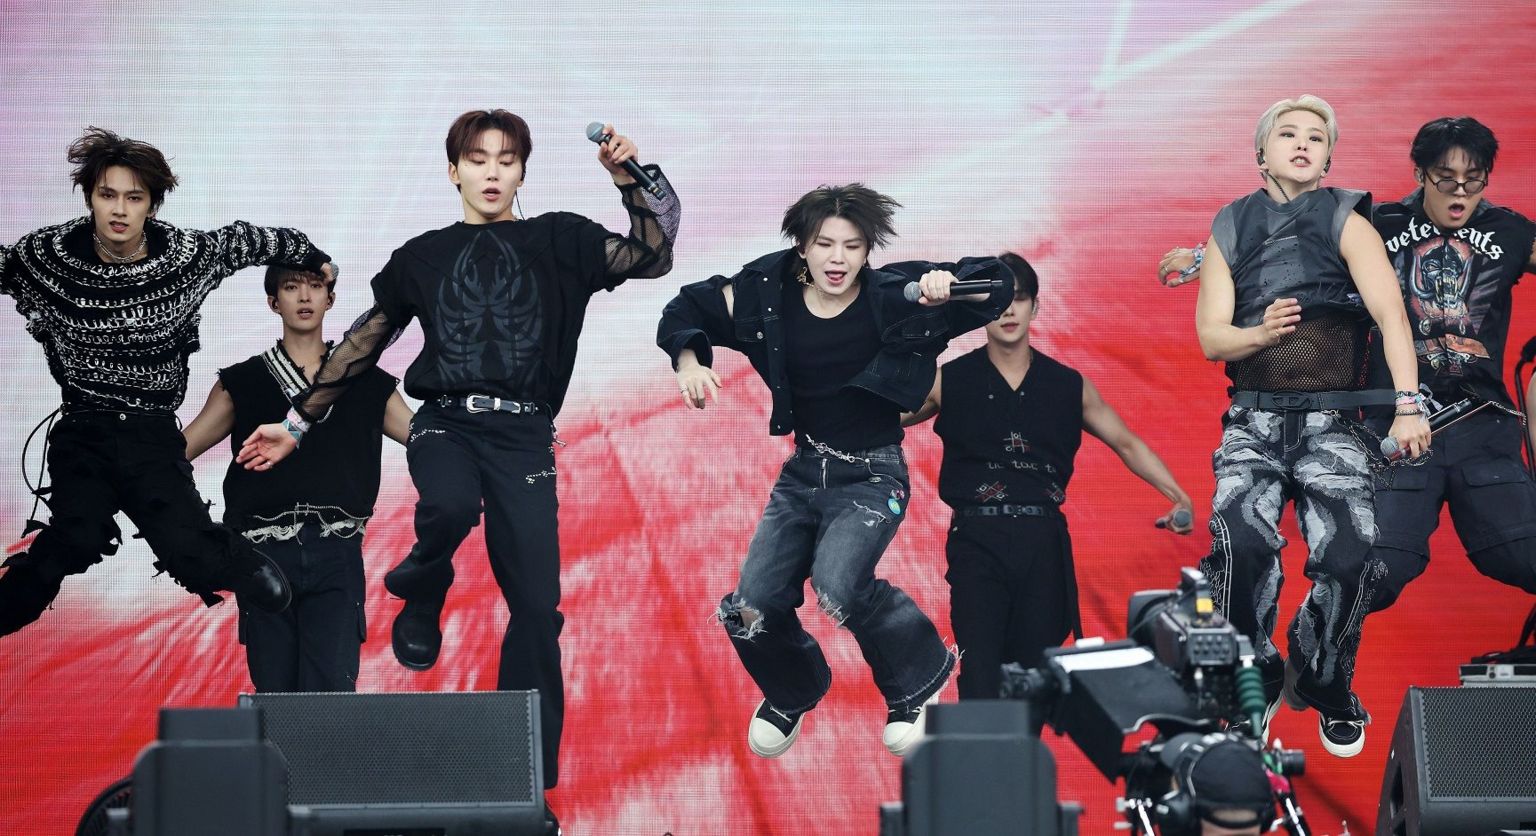 A K-Pop group performing on the stage